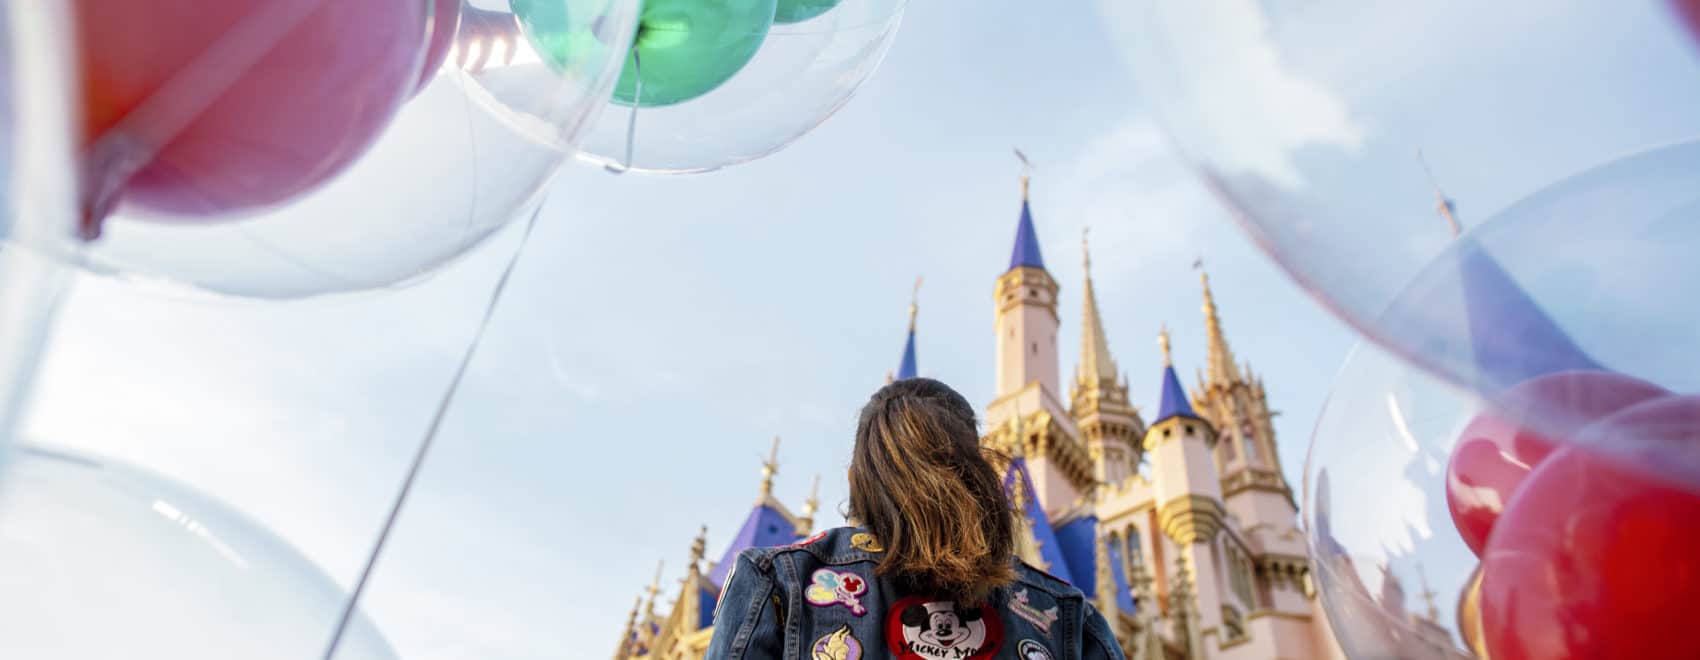 Staying at any of the best Disney deluxe resorts in Walt Disney World will having you feeling like this girl - surrounded by Mickey balloons, decked out in her favorite Disney jacket, and spending her time in the castle of her dreams